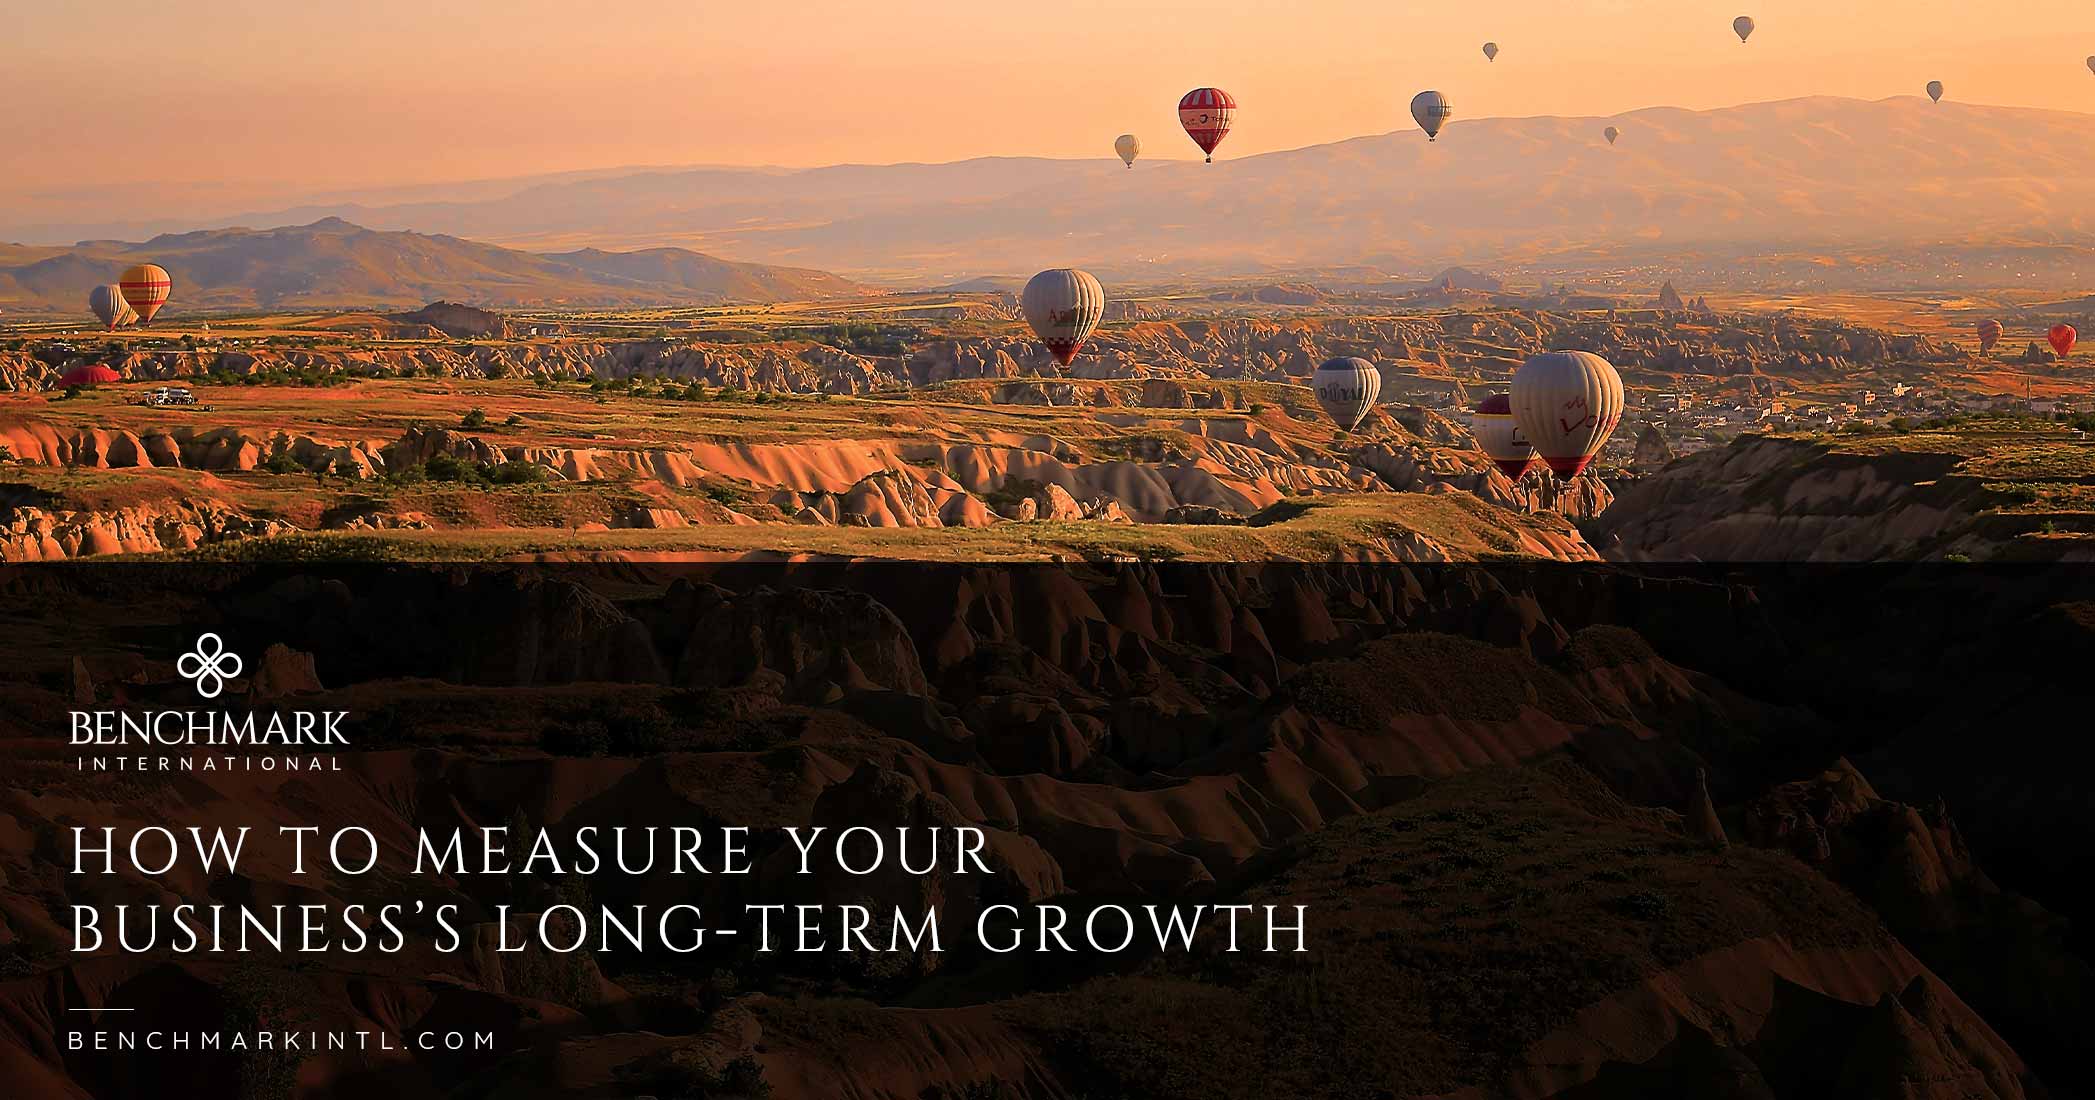 How To Measure Your Business’s Long-Term Growth